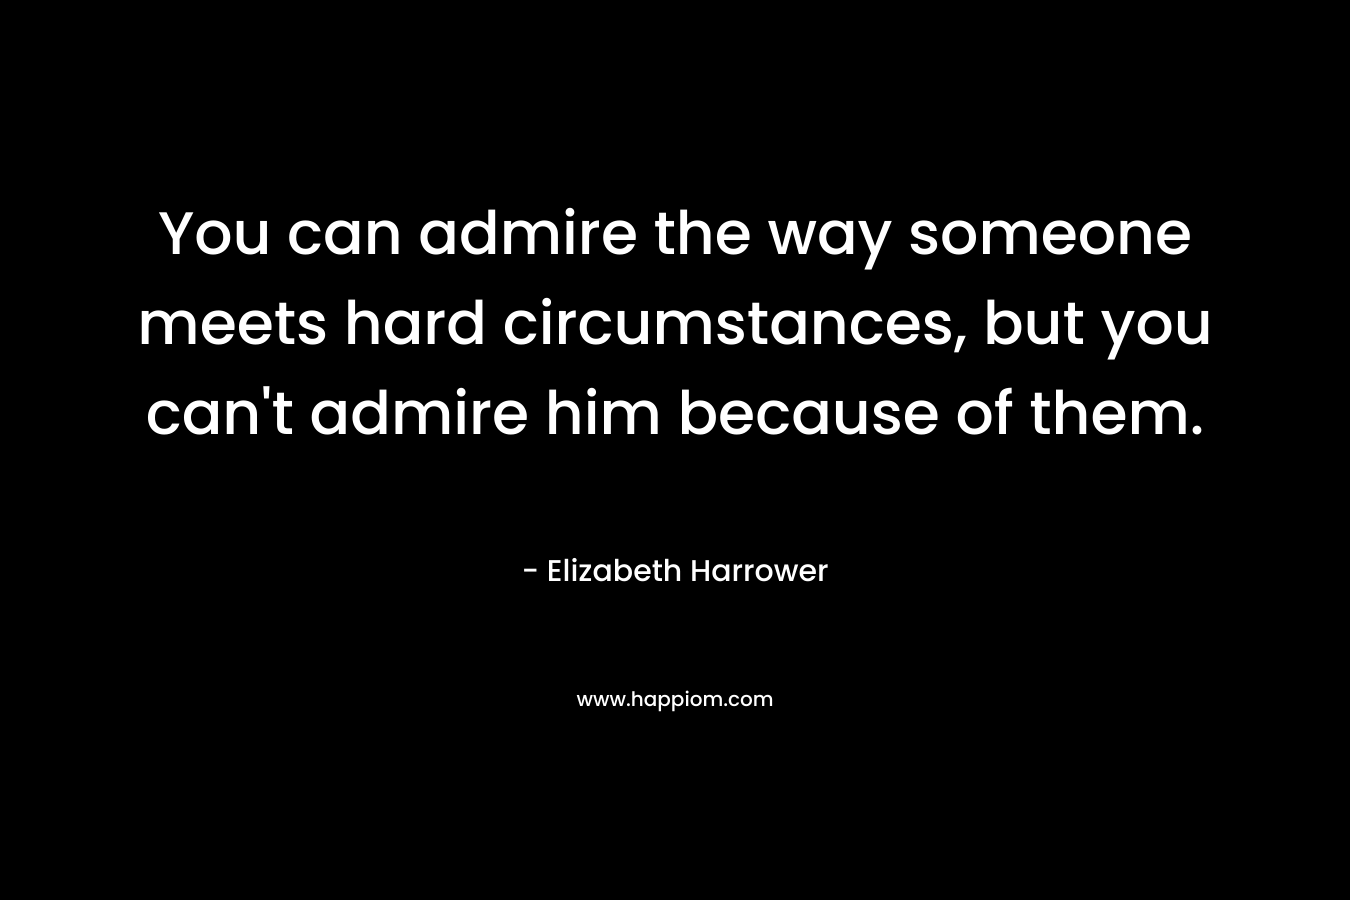 You can admire the way someone meets hard circumstances, but you can't admire him because of them.